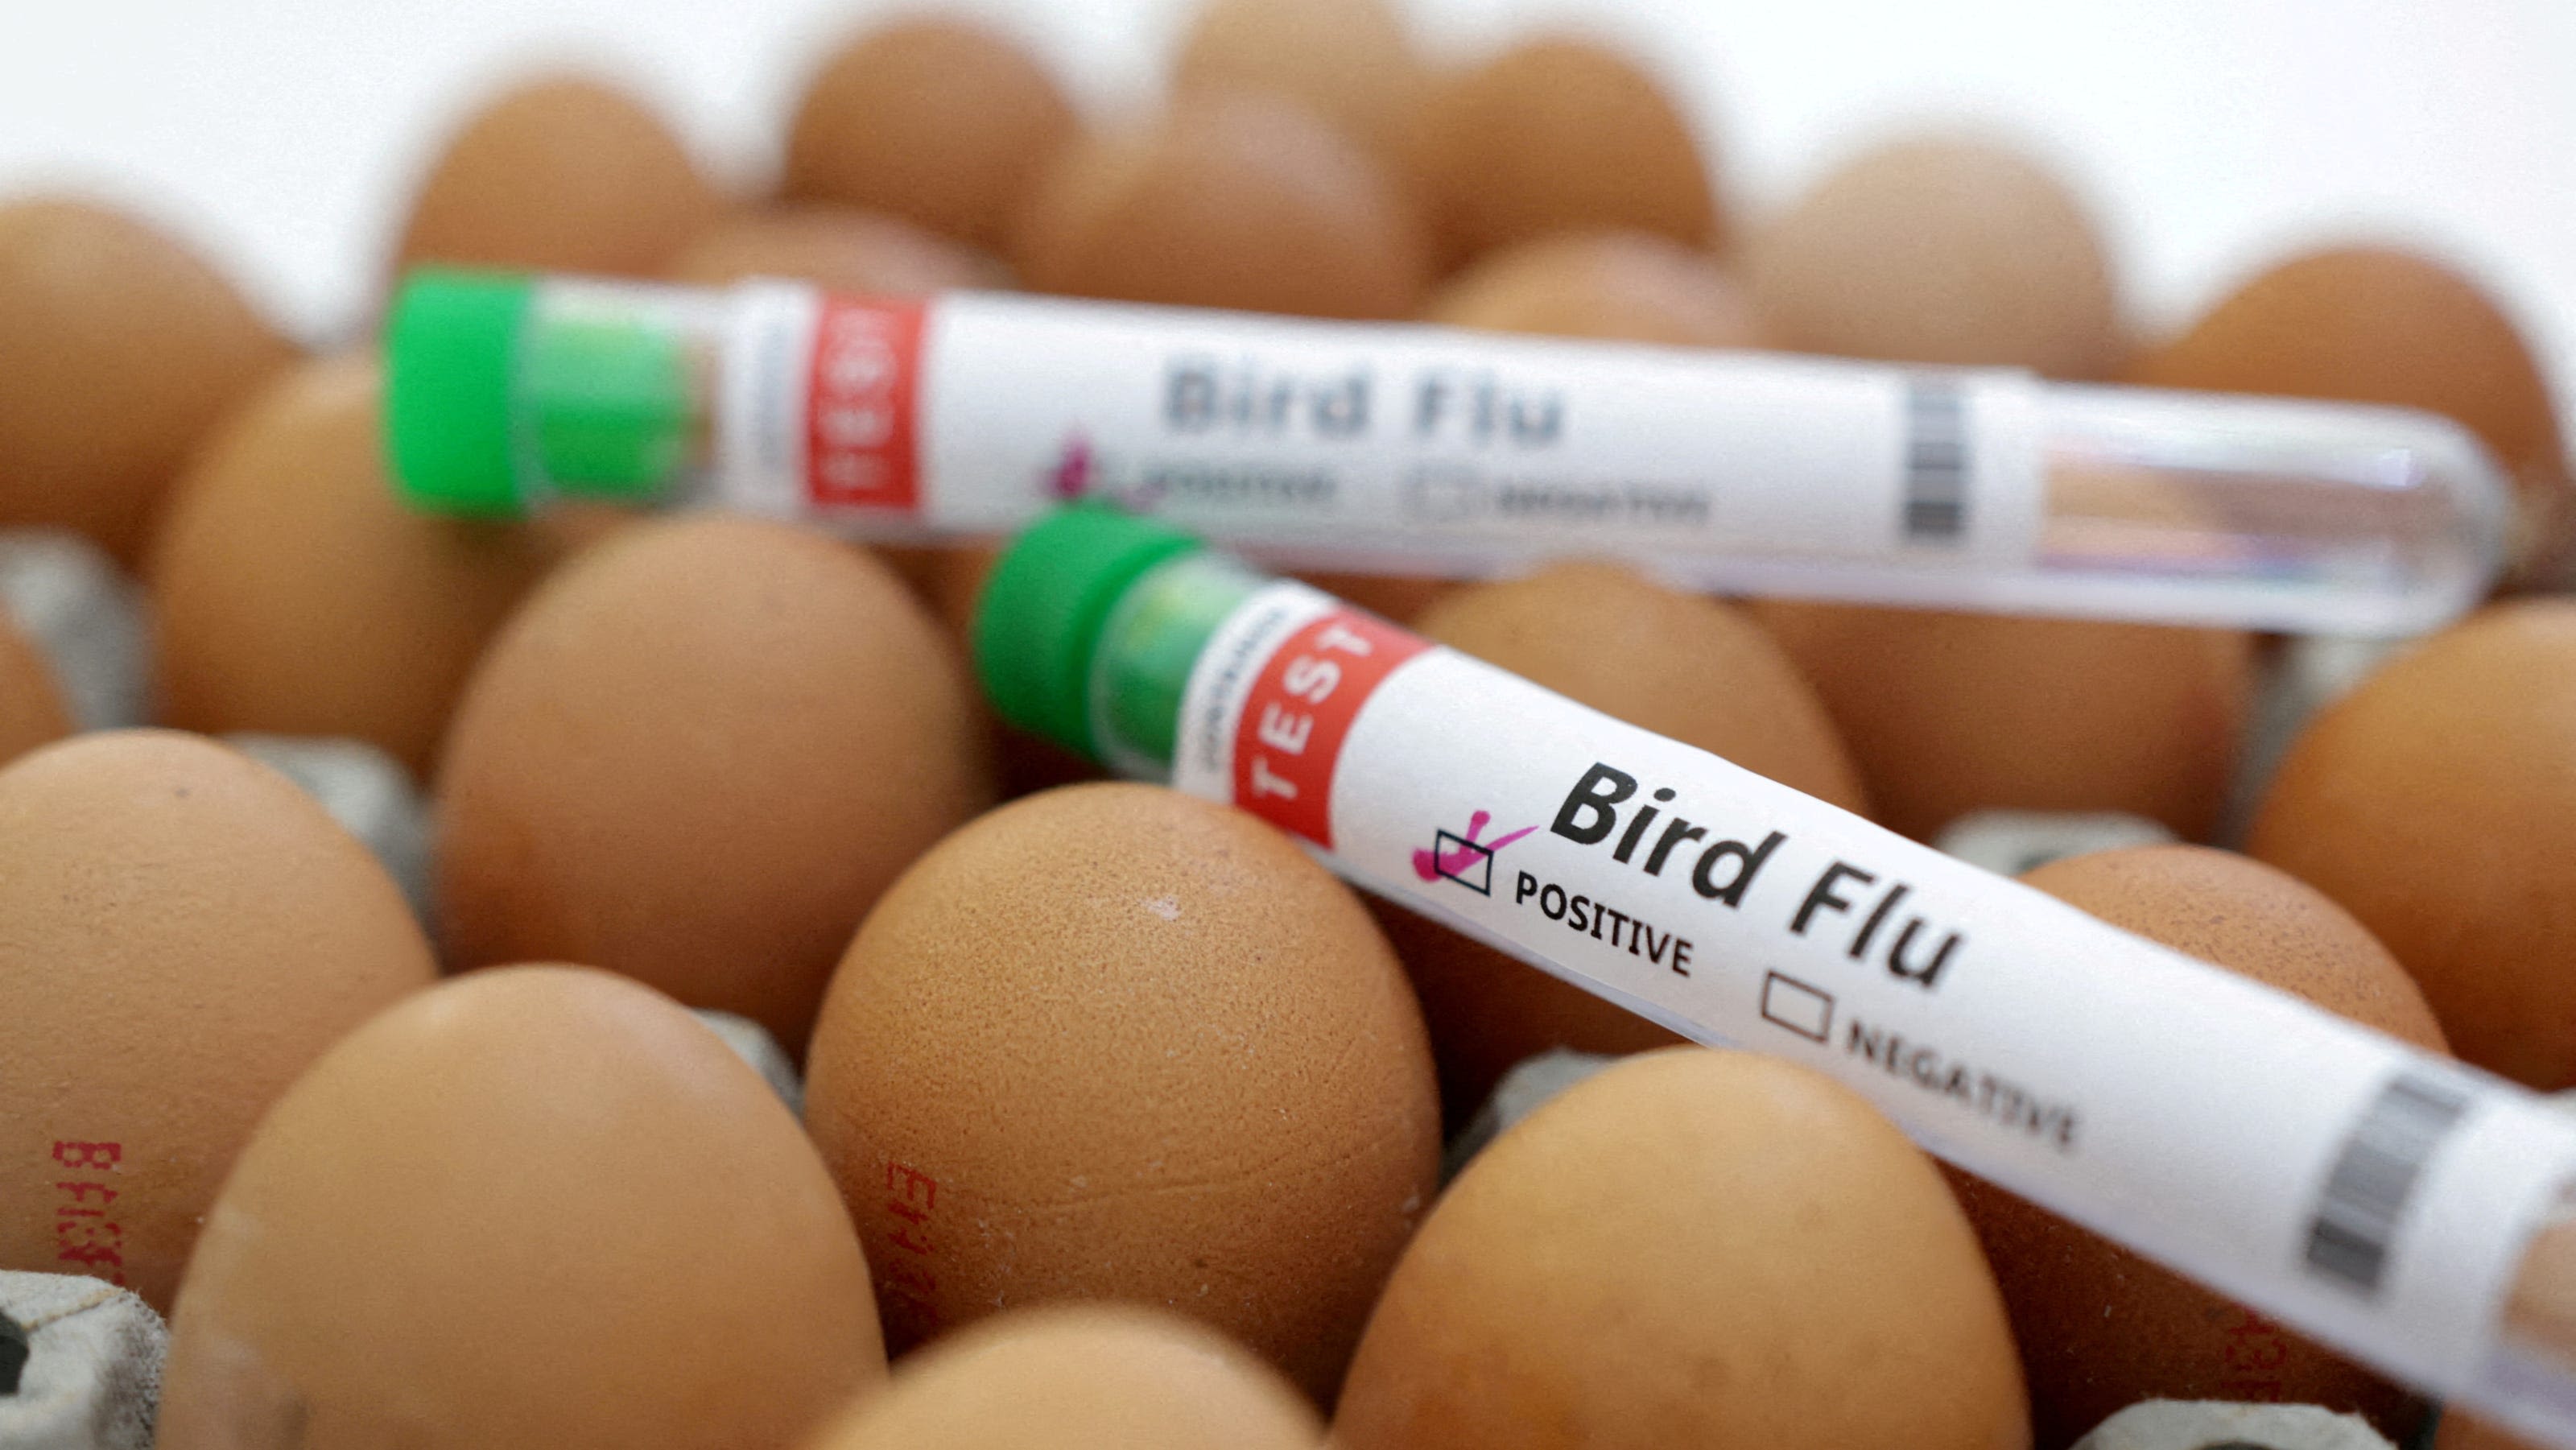 CDC unveils dashboard to track bird flu as virus spreads among dairy farms